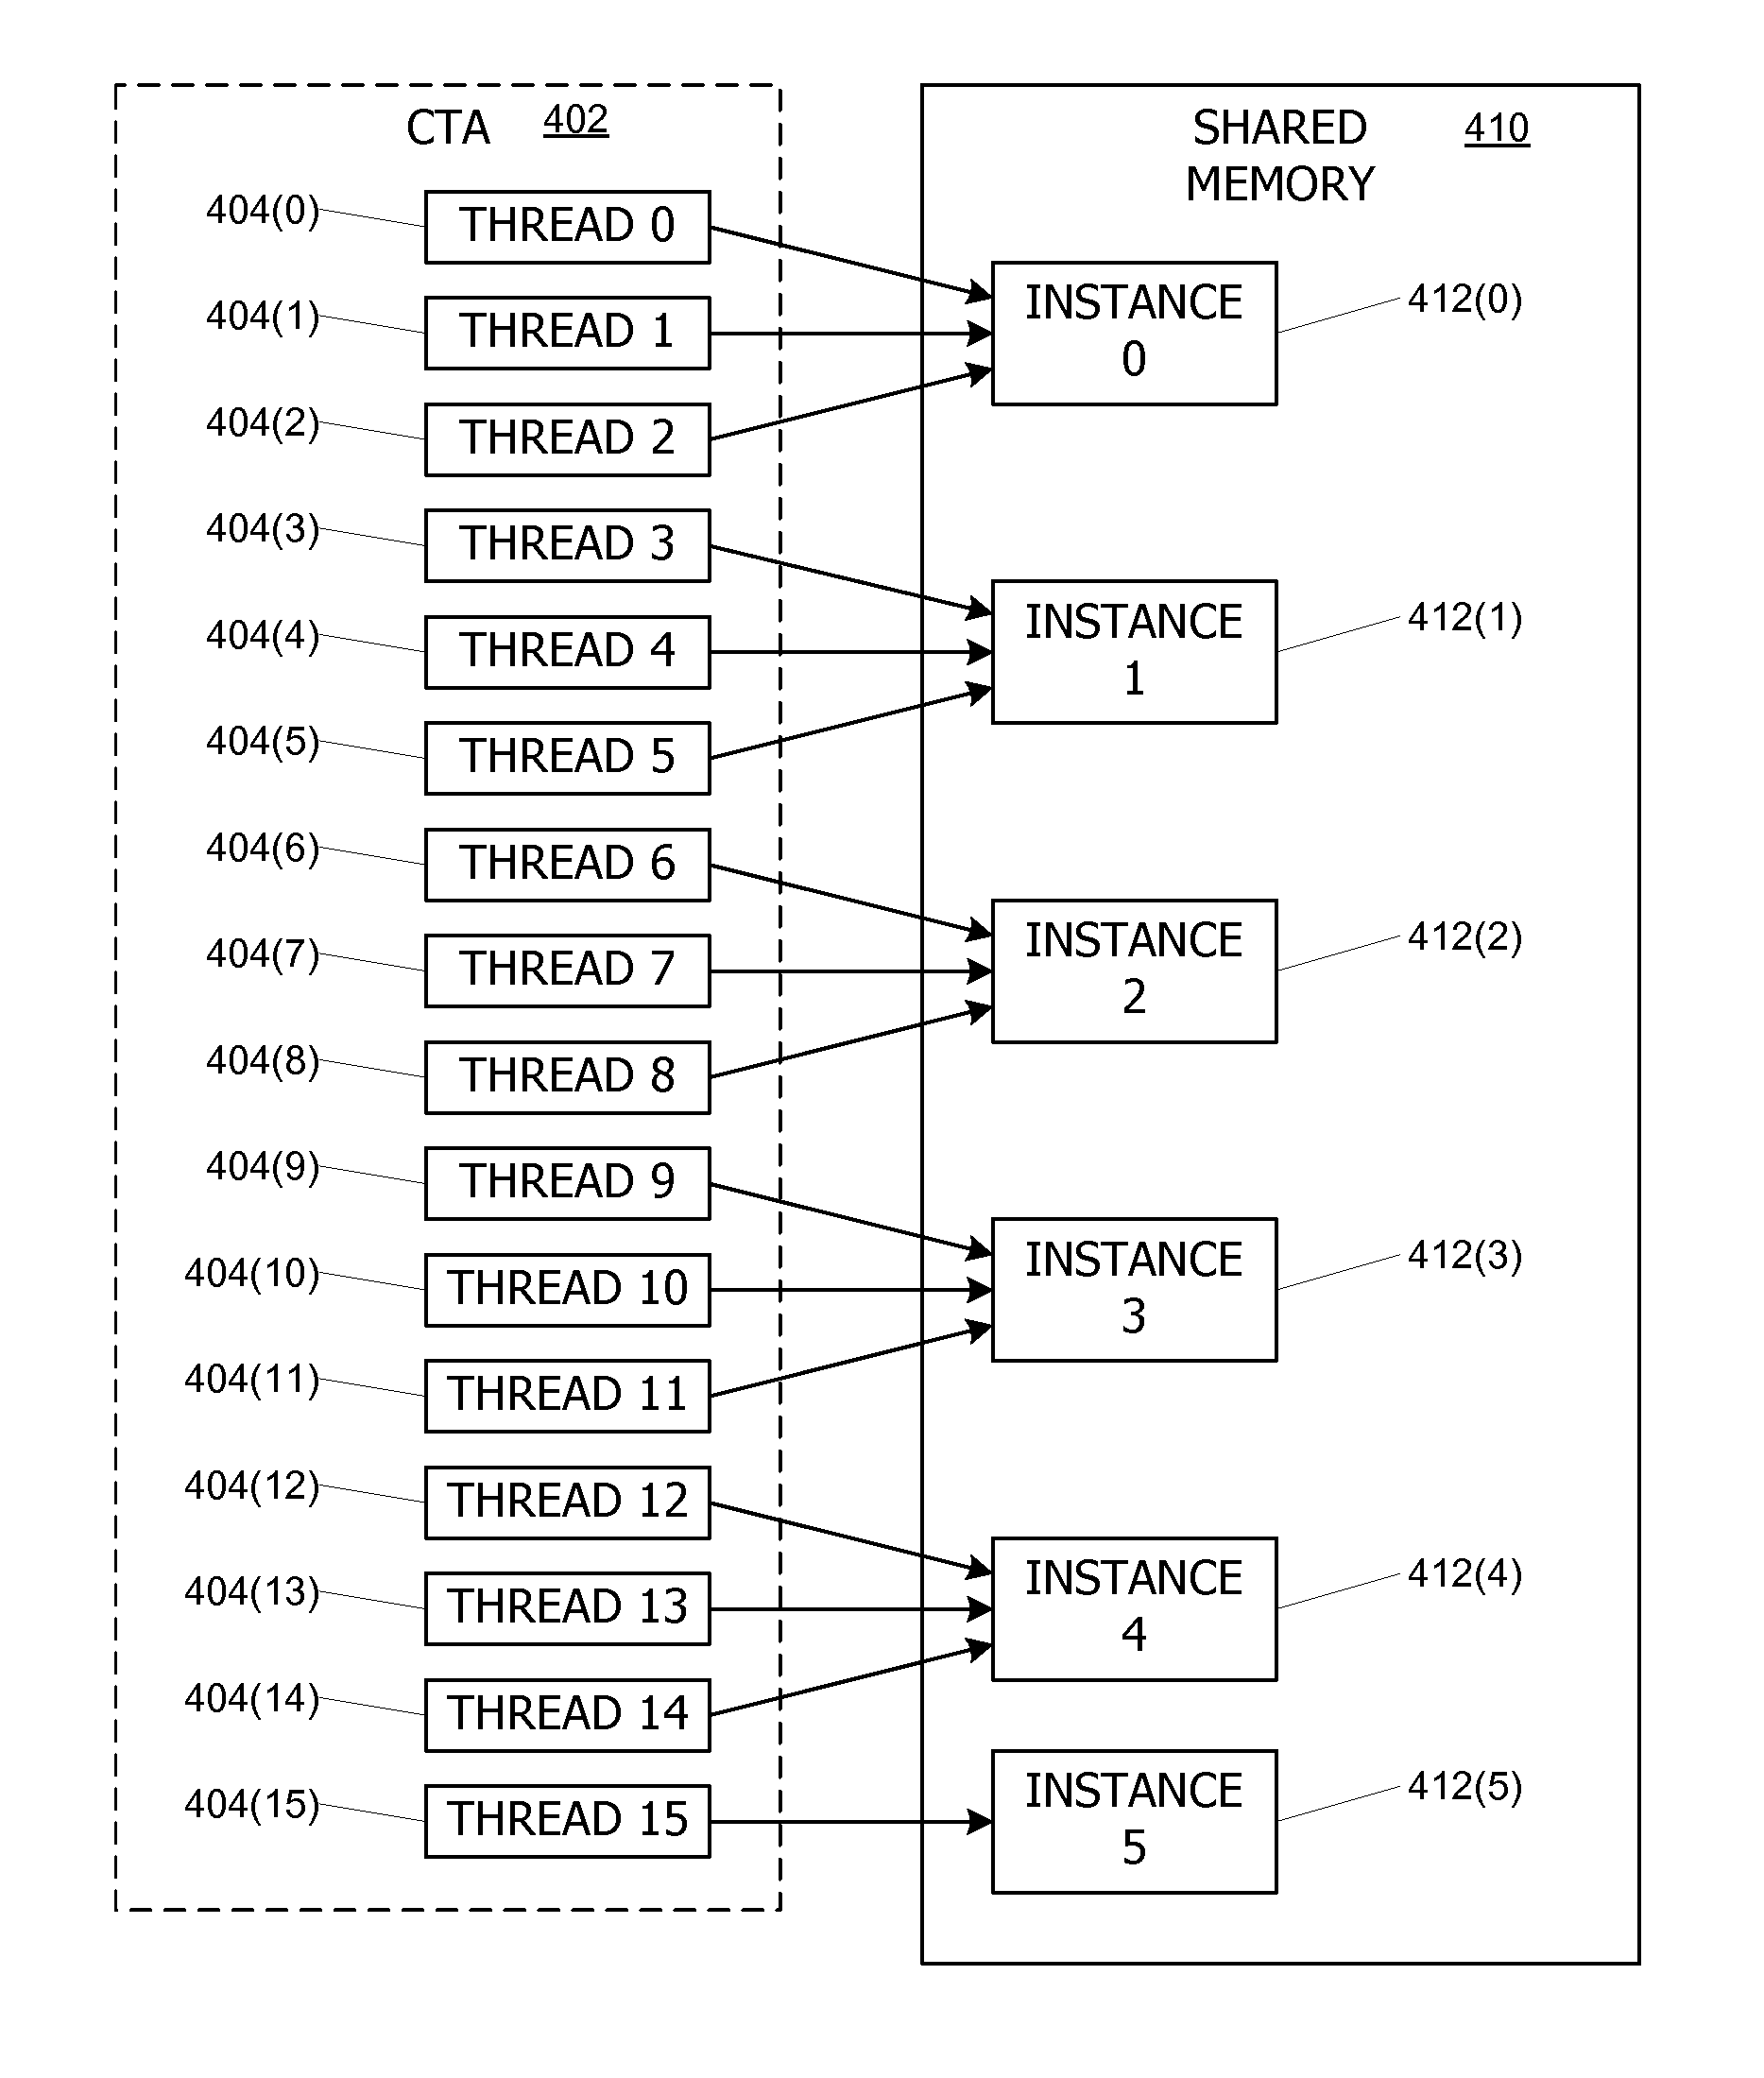 Controlling access to memory resources shared among parallel synchronizable threads